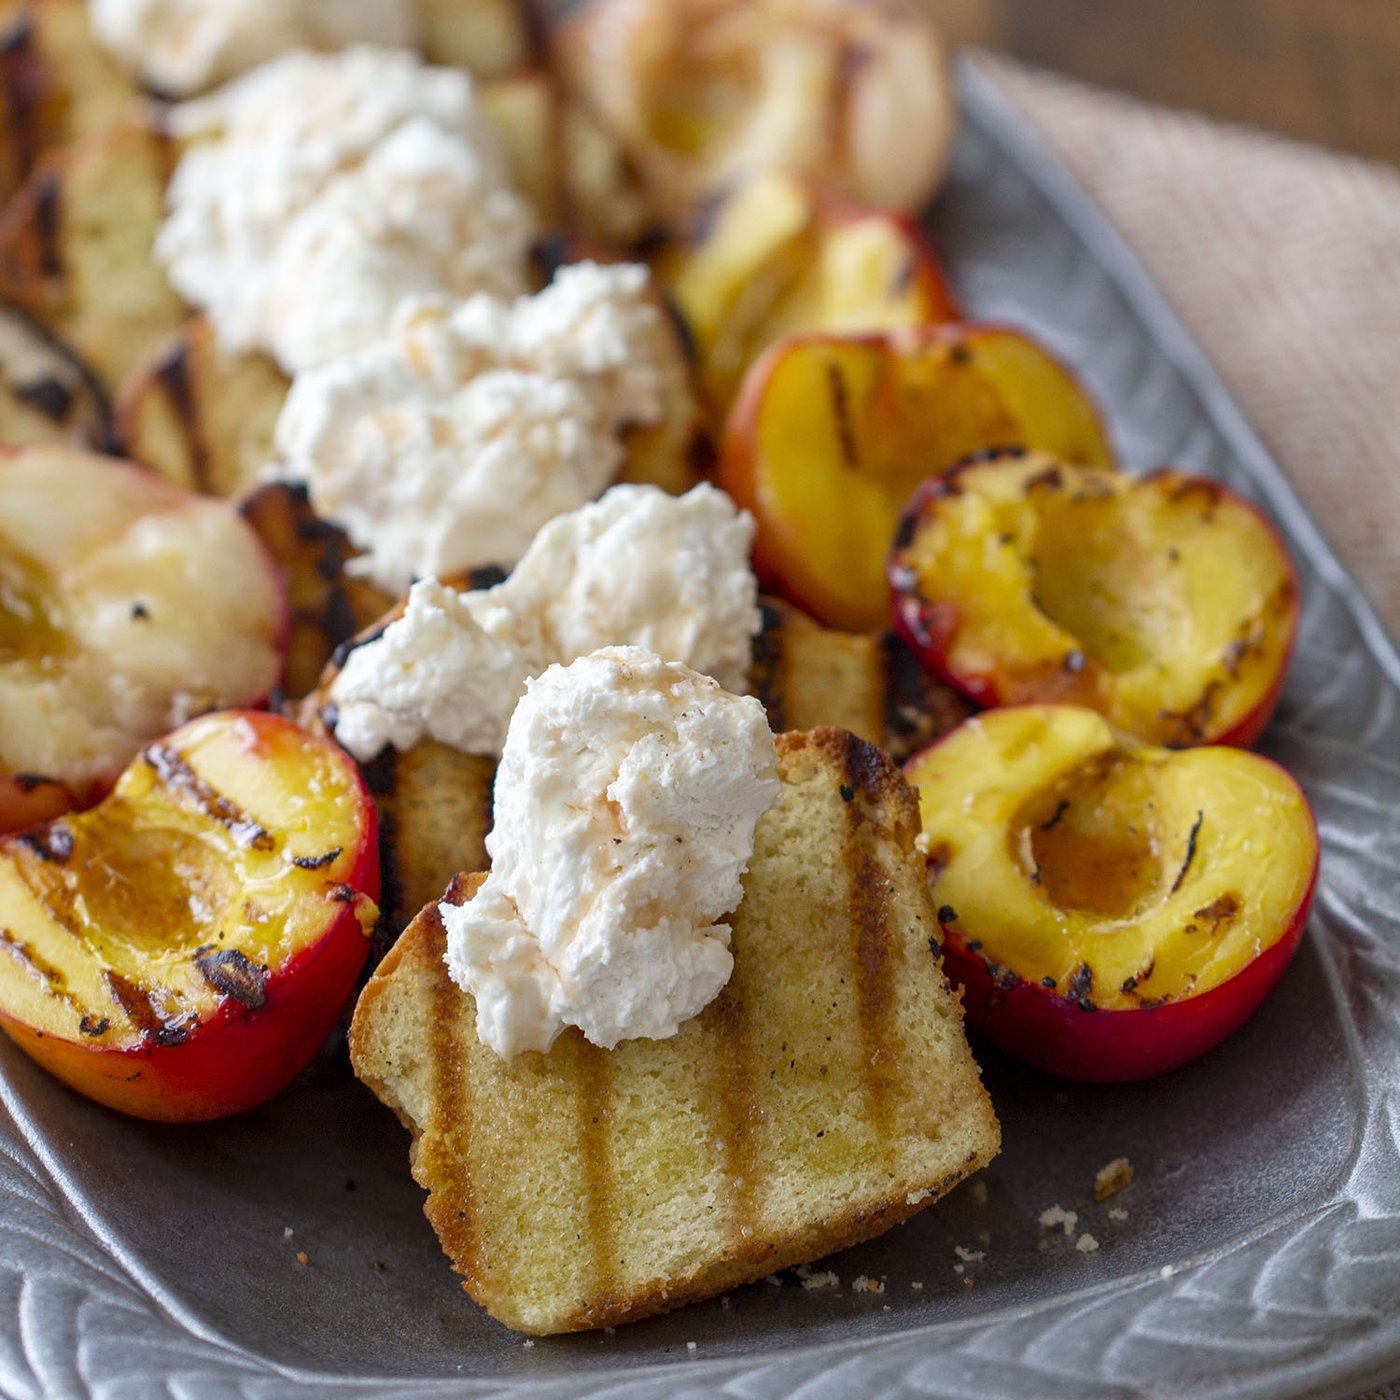 GRILLED POUND CAKE & STONE FRUIT WITH SALTED STRAWBERRY WHIPPED CREAM